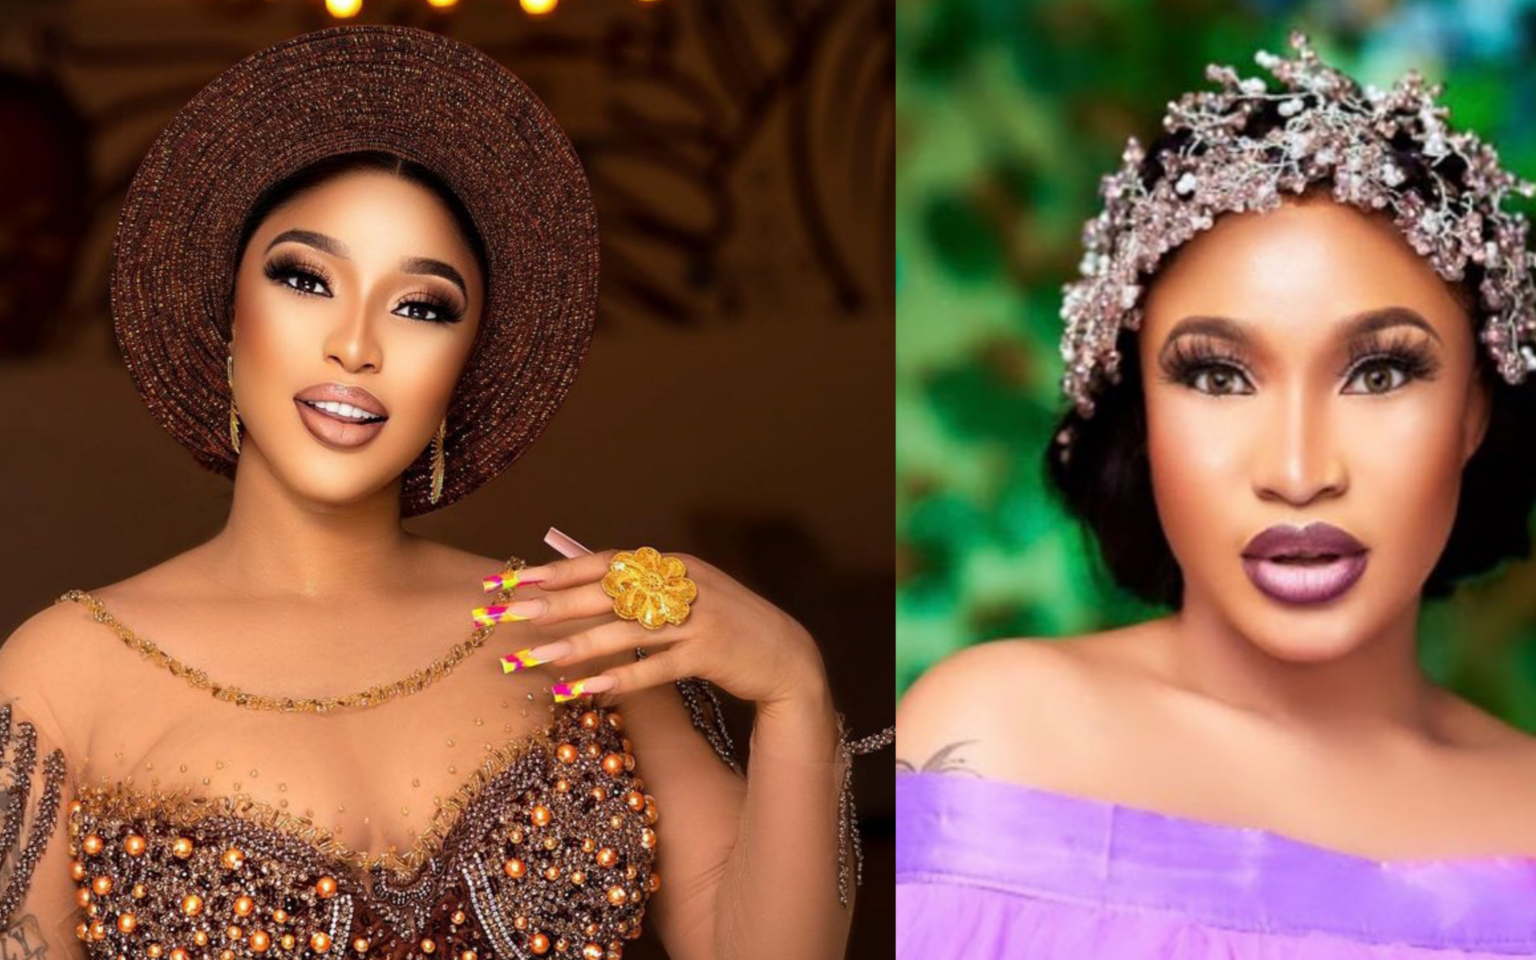 'I have decided to stay happy for the rest of my life' - Tonto Dikeh says